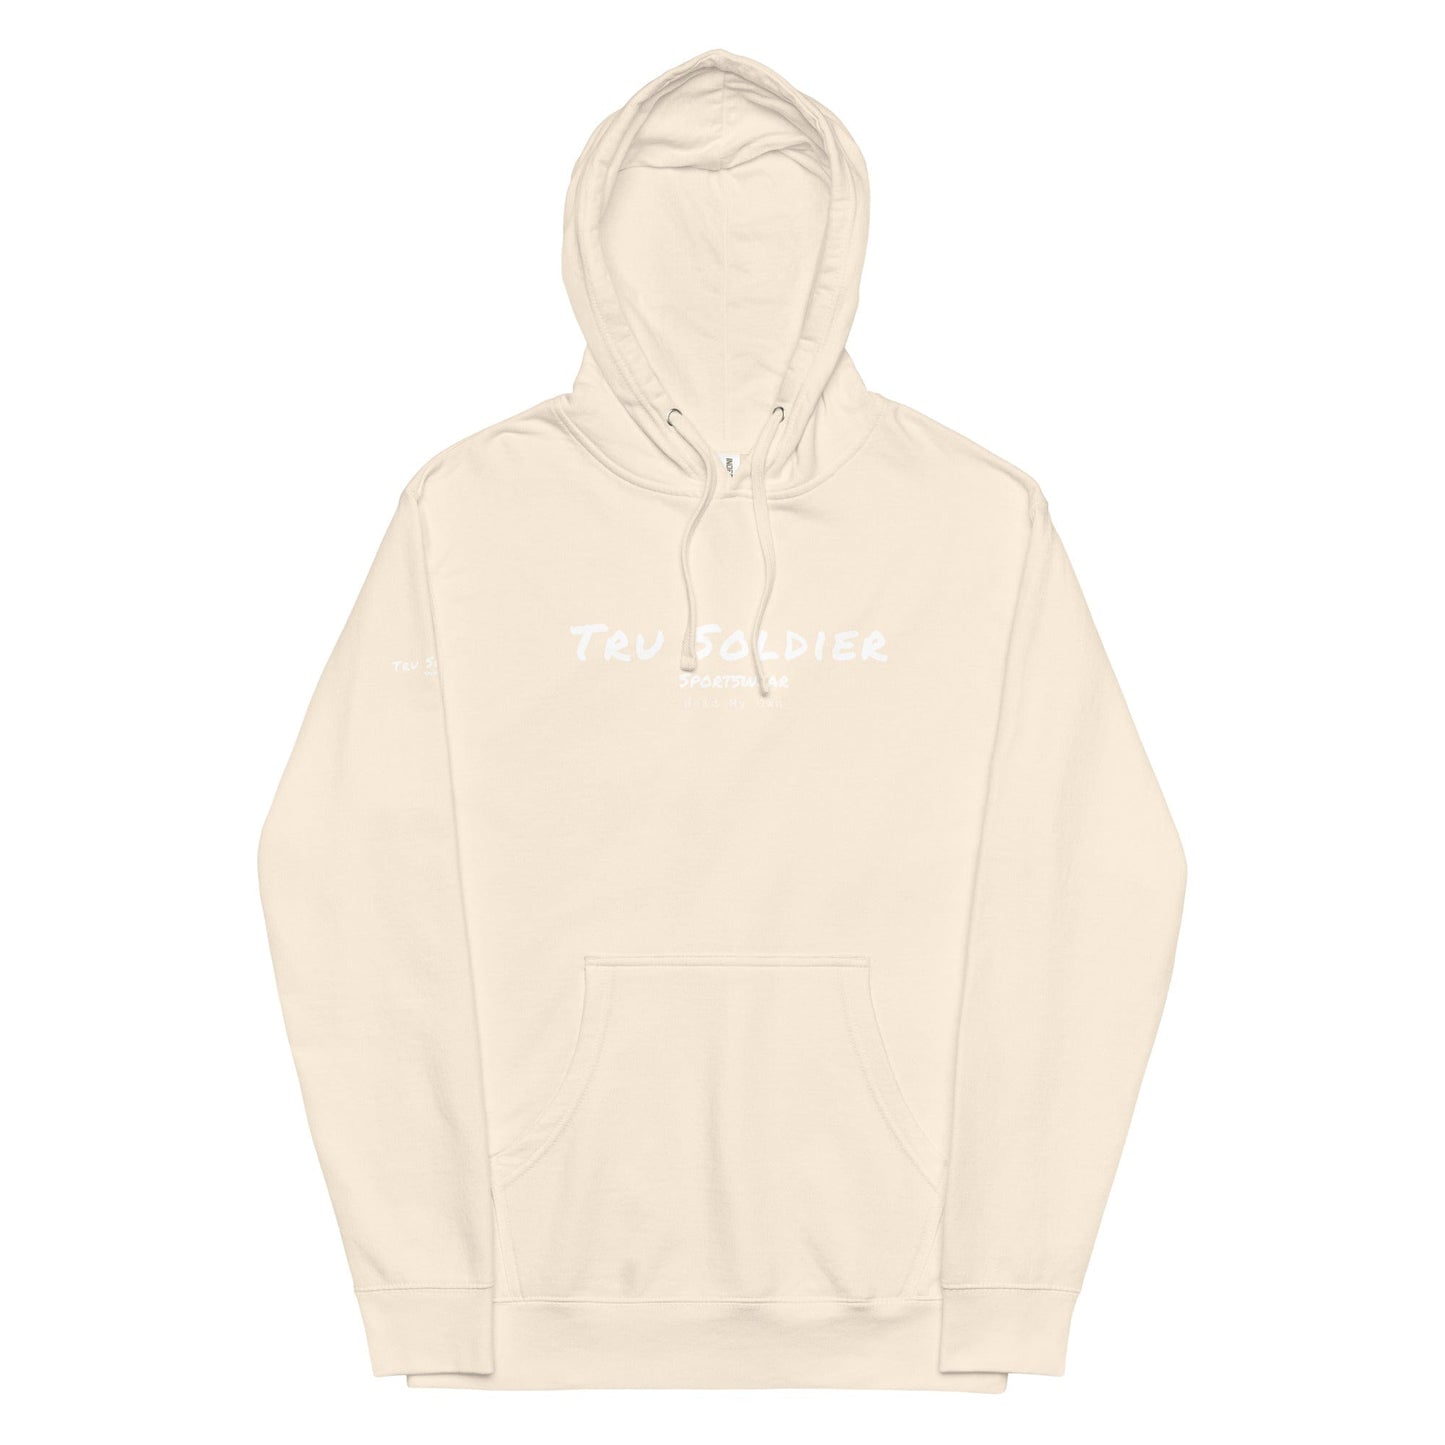 Signature midweight hoodie